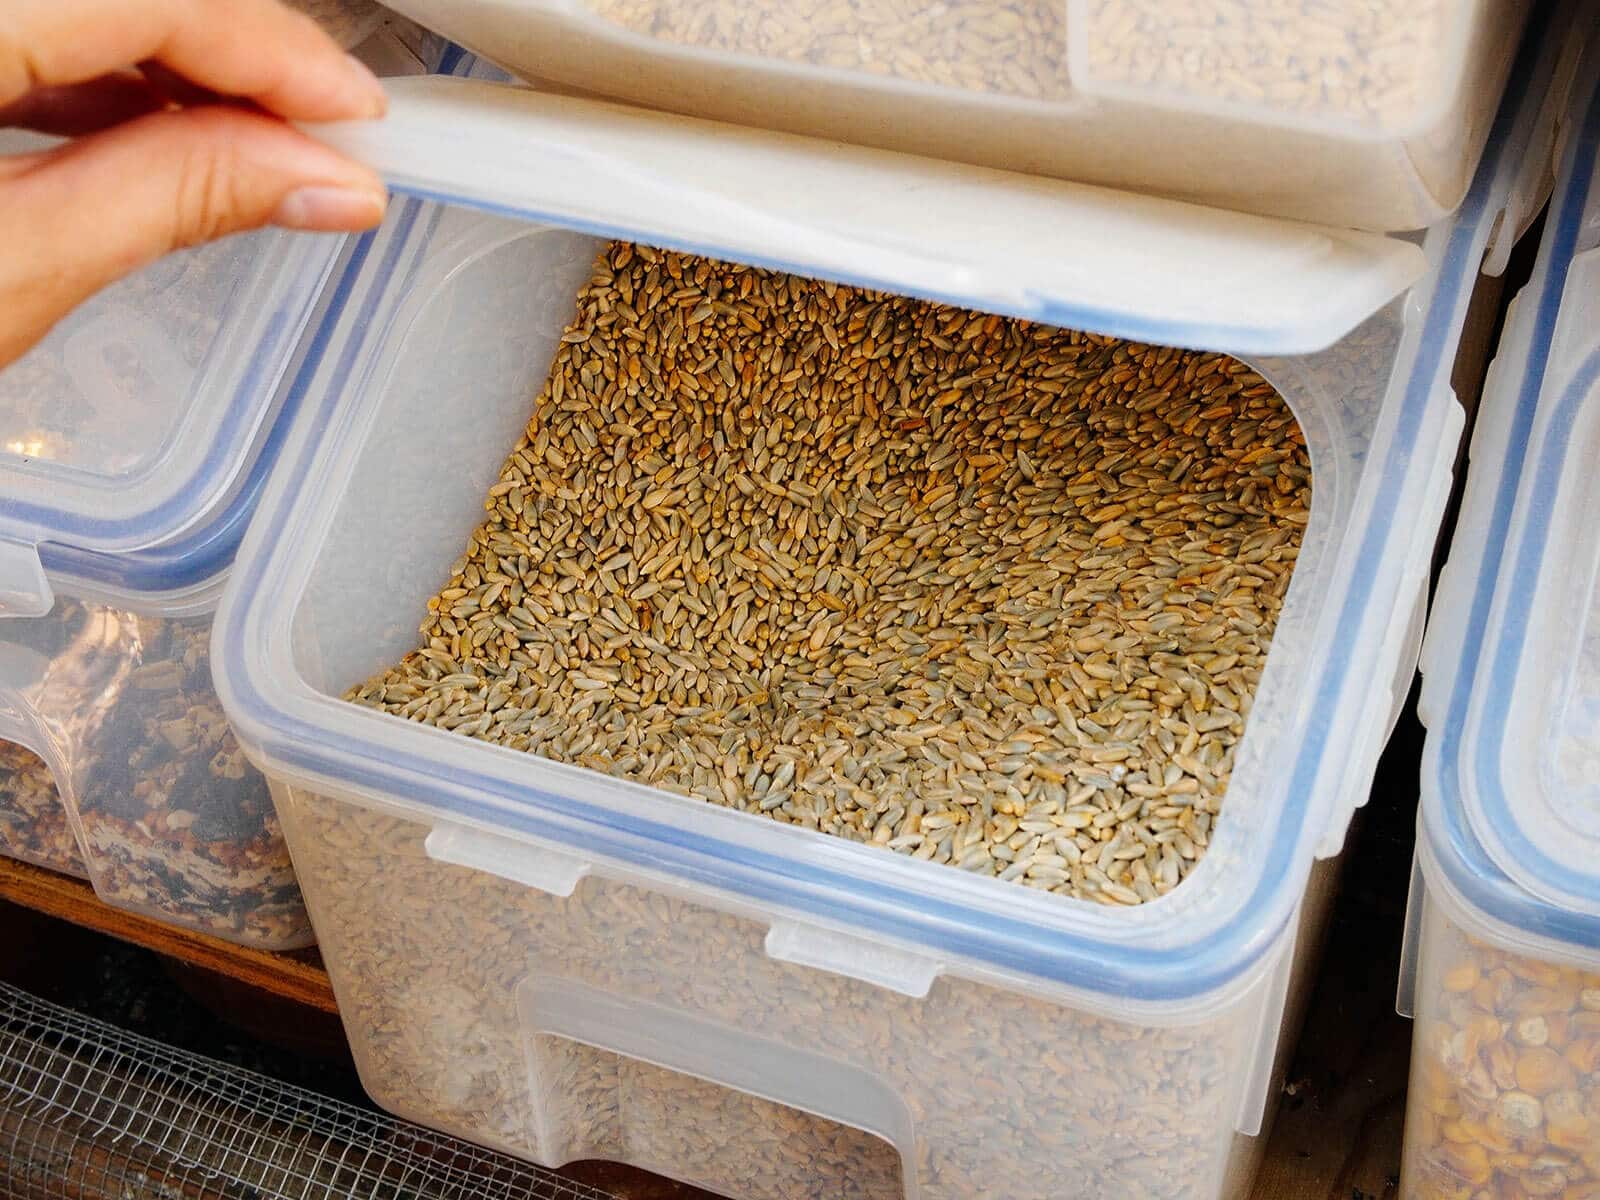 Container filled with rye berries